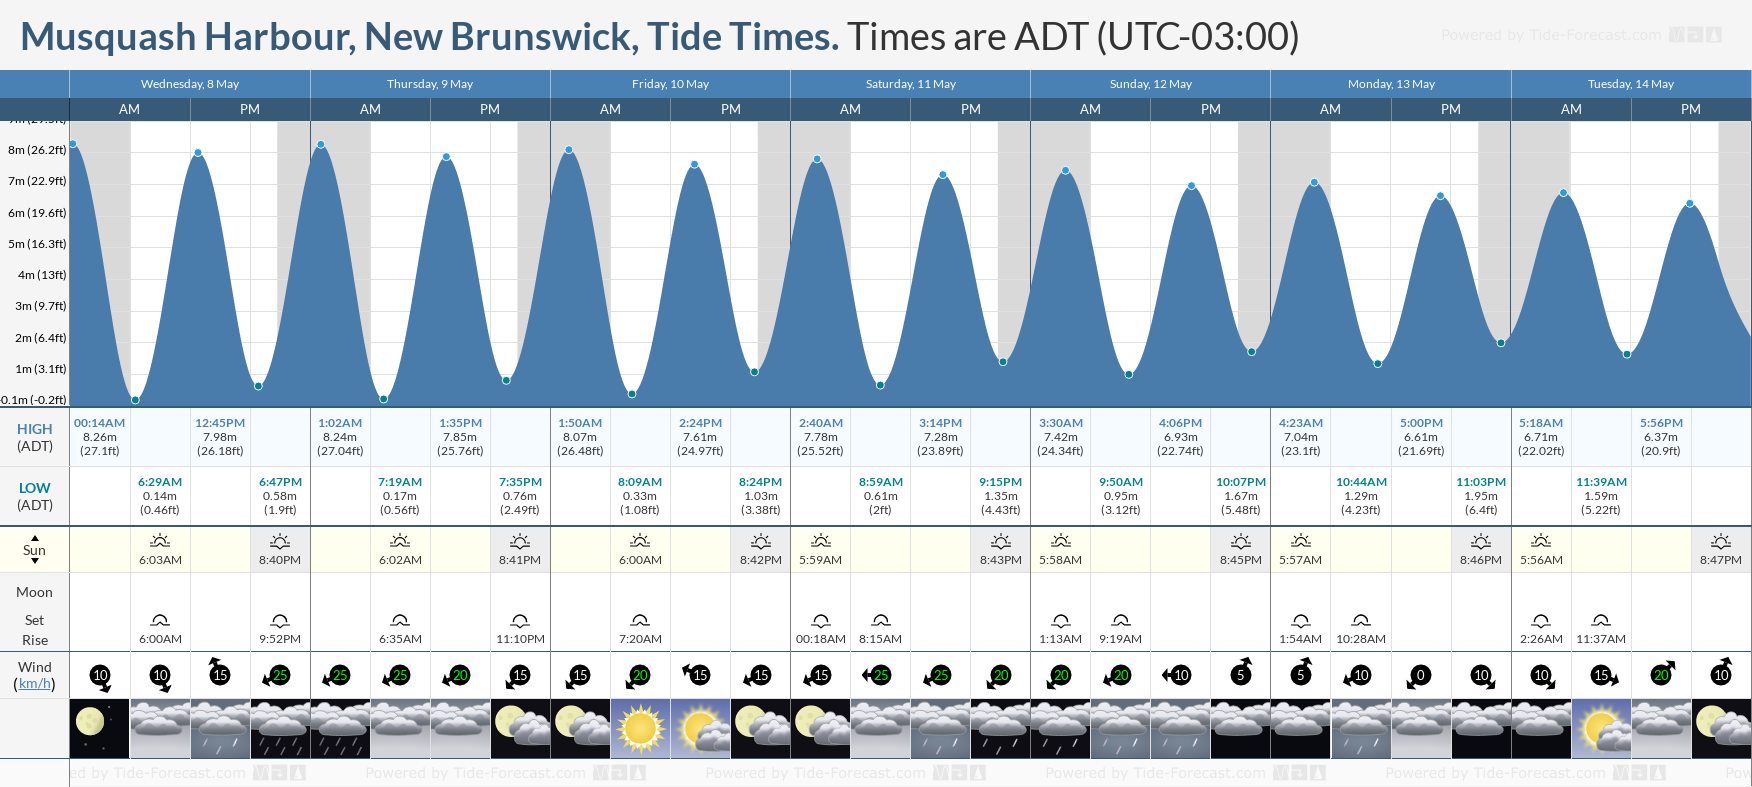 Musquash Harbour, New Brunswick Tide Chart including high and low tide times for the next 7 days